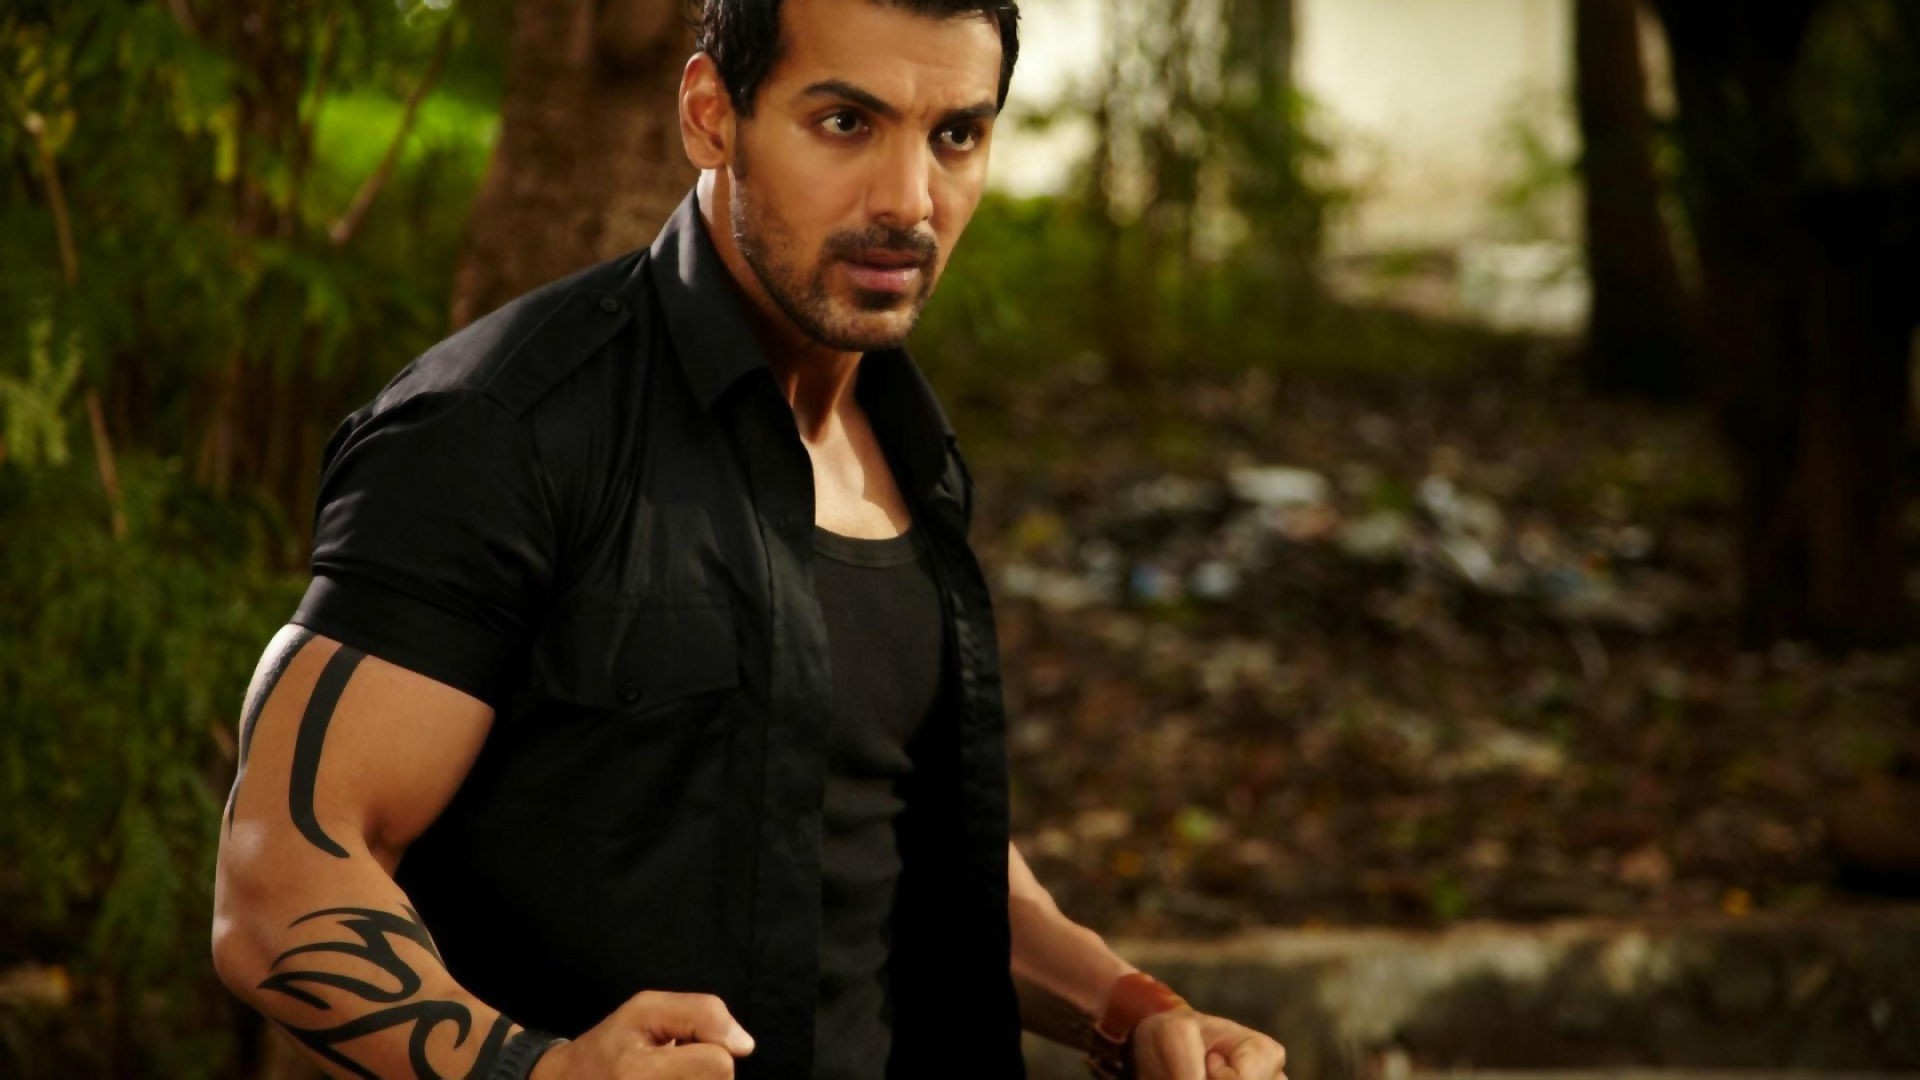 john abraham in rocky handsome movie free awesome image for mobile